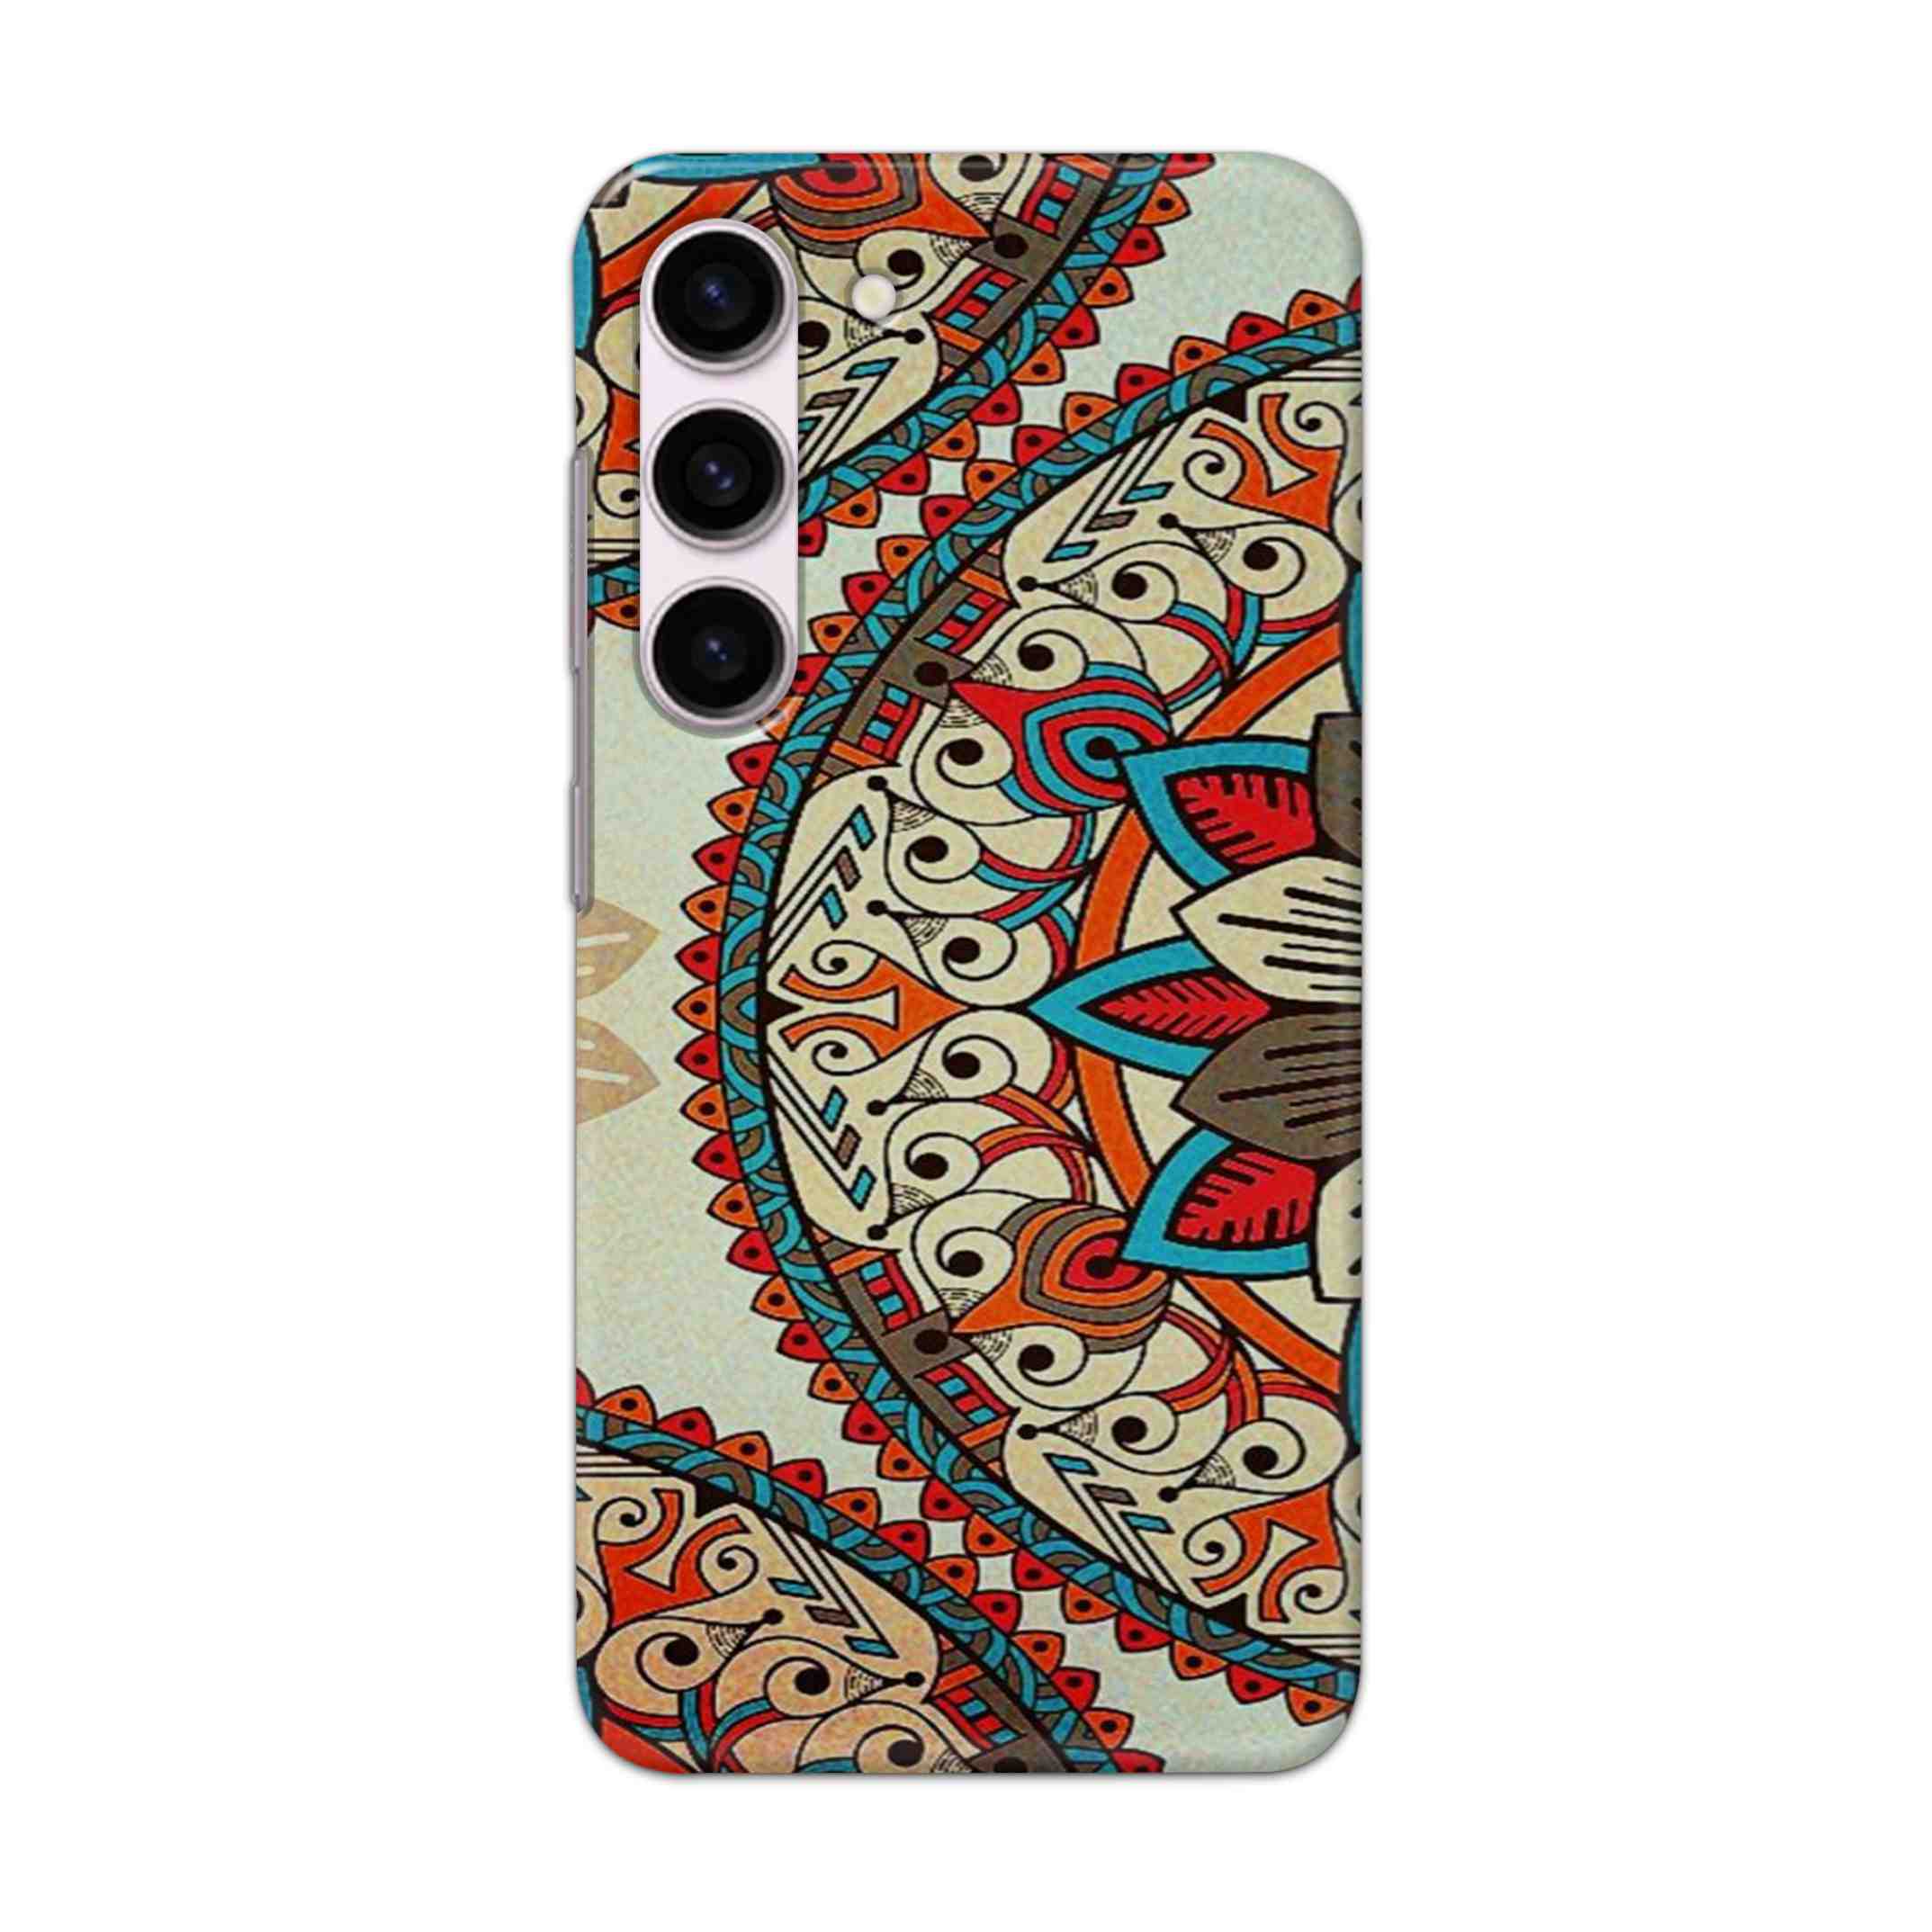 Buy Aztec Mandalas Hard Back Mobile Phone Case Cover For Samsung Galaxy S23 Online